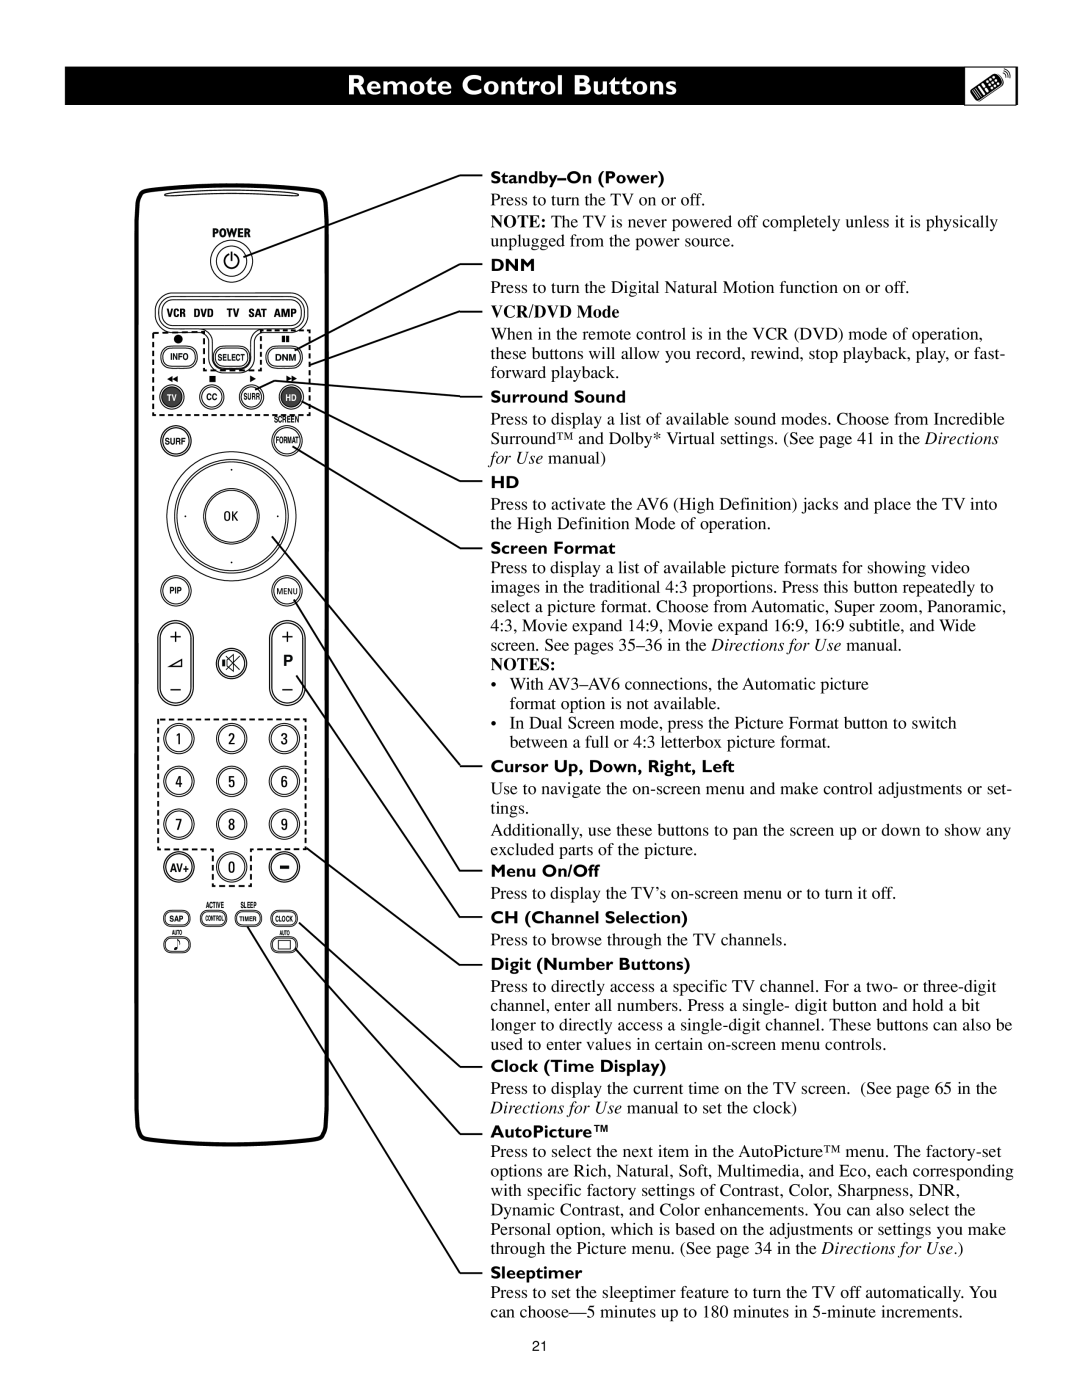 Philips 55PL9524, 62PL9524 setup guide Remote Control Buttons, Standby-On Power, VCR/DVD Mode 